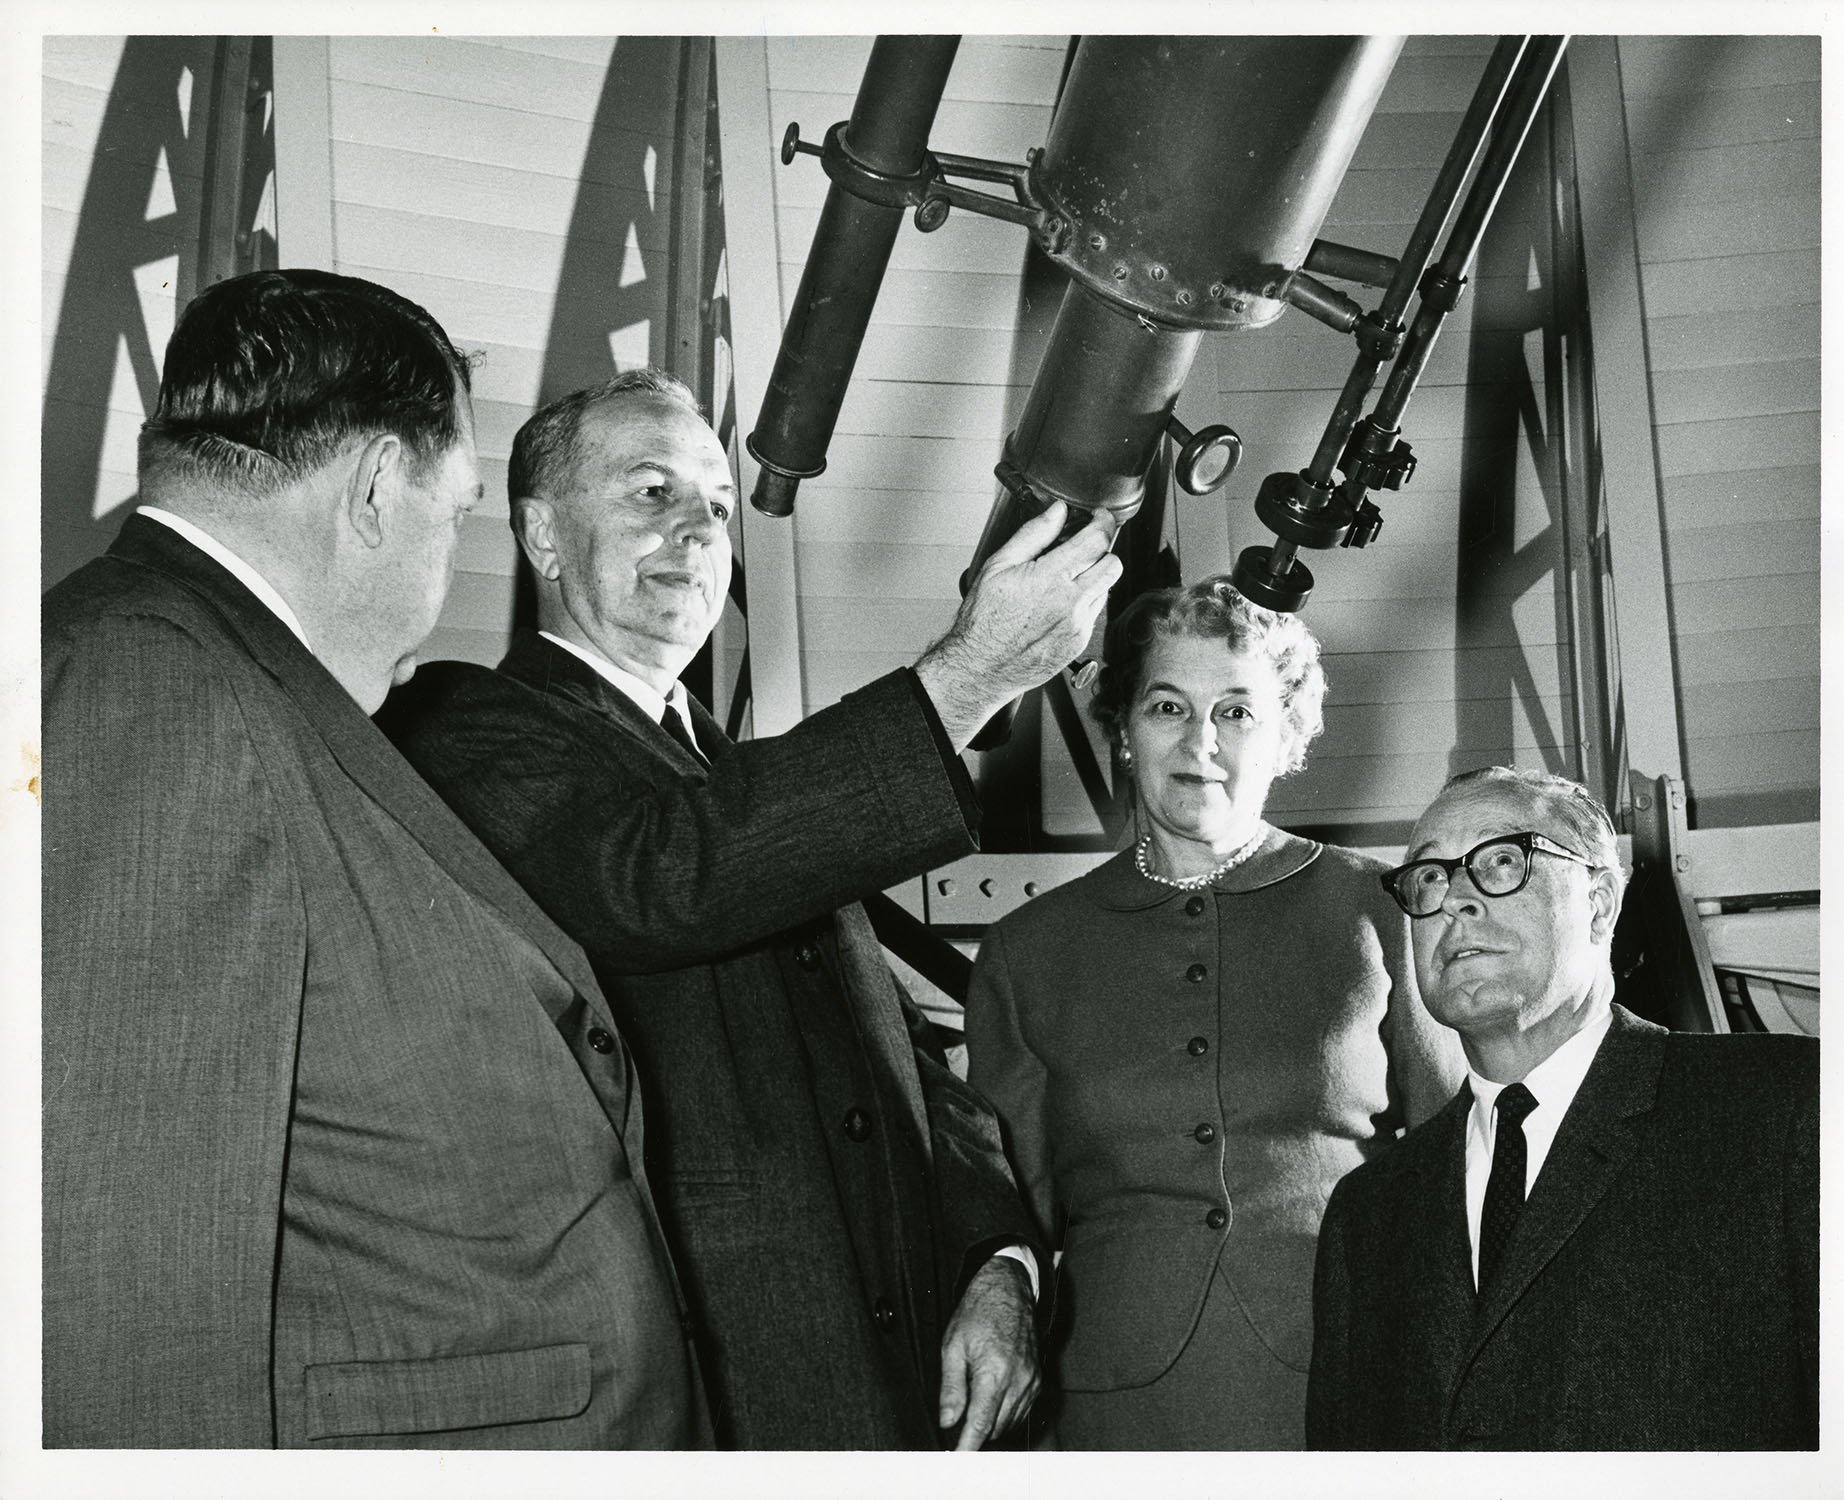 President Robert R. Martin, Smith Park, and others inside the observatory, ca. 1960s. EKU Photograph Collection 